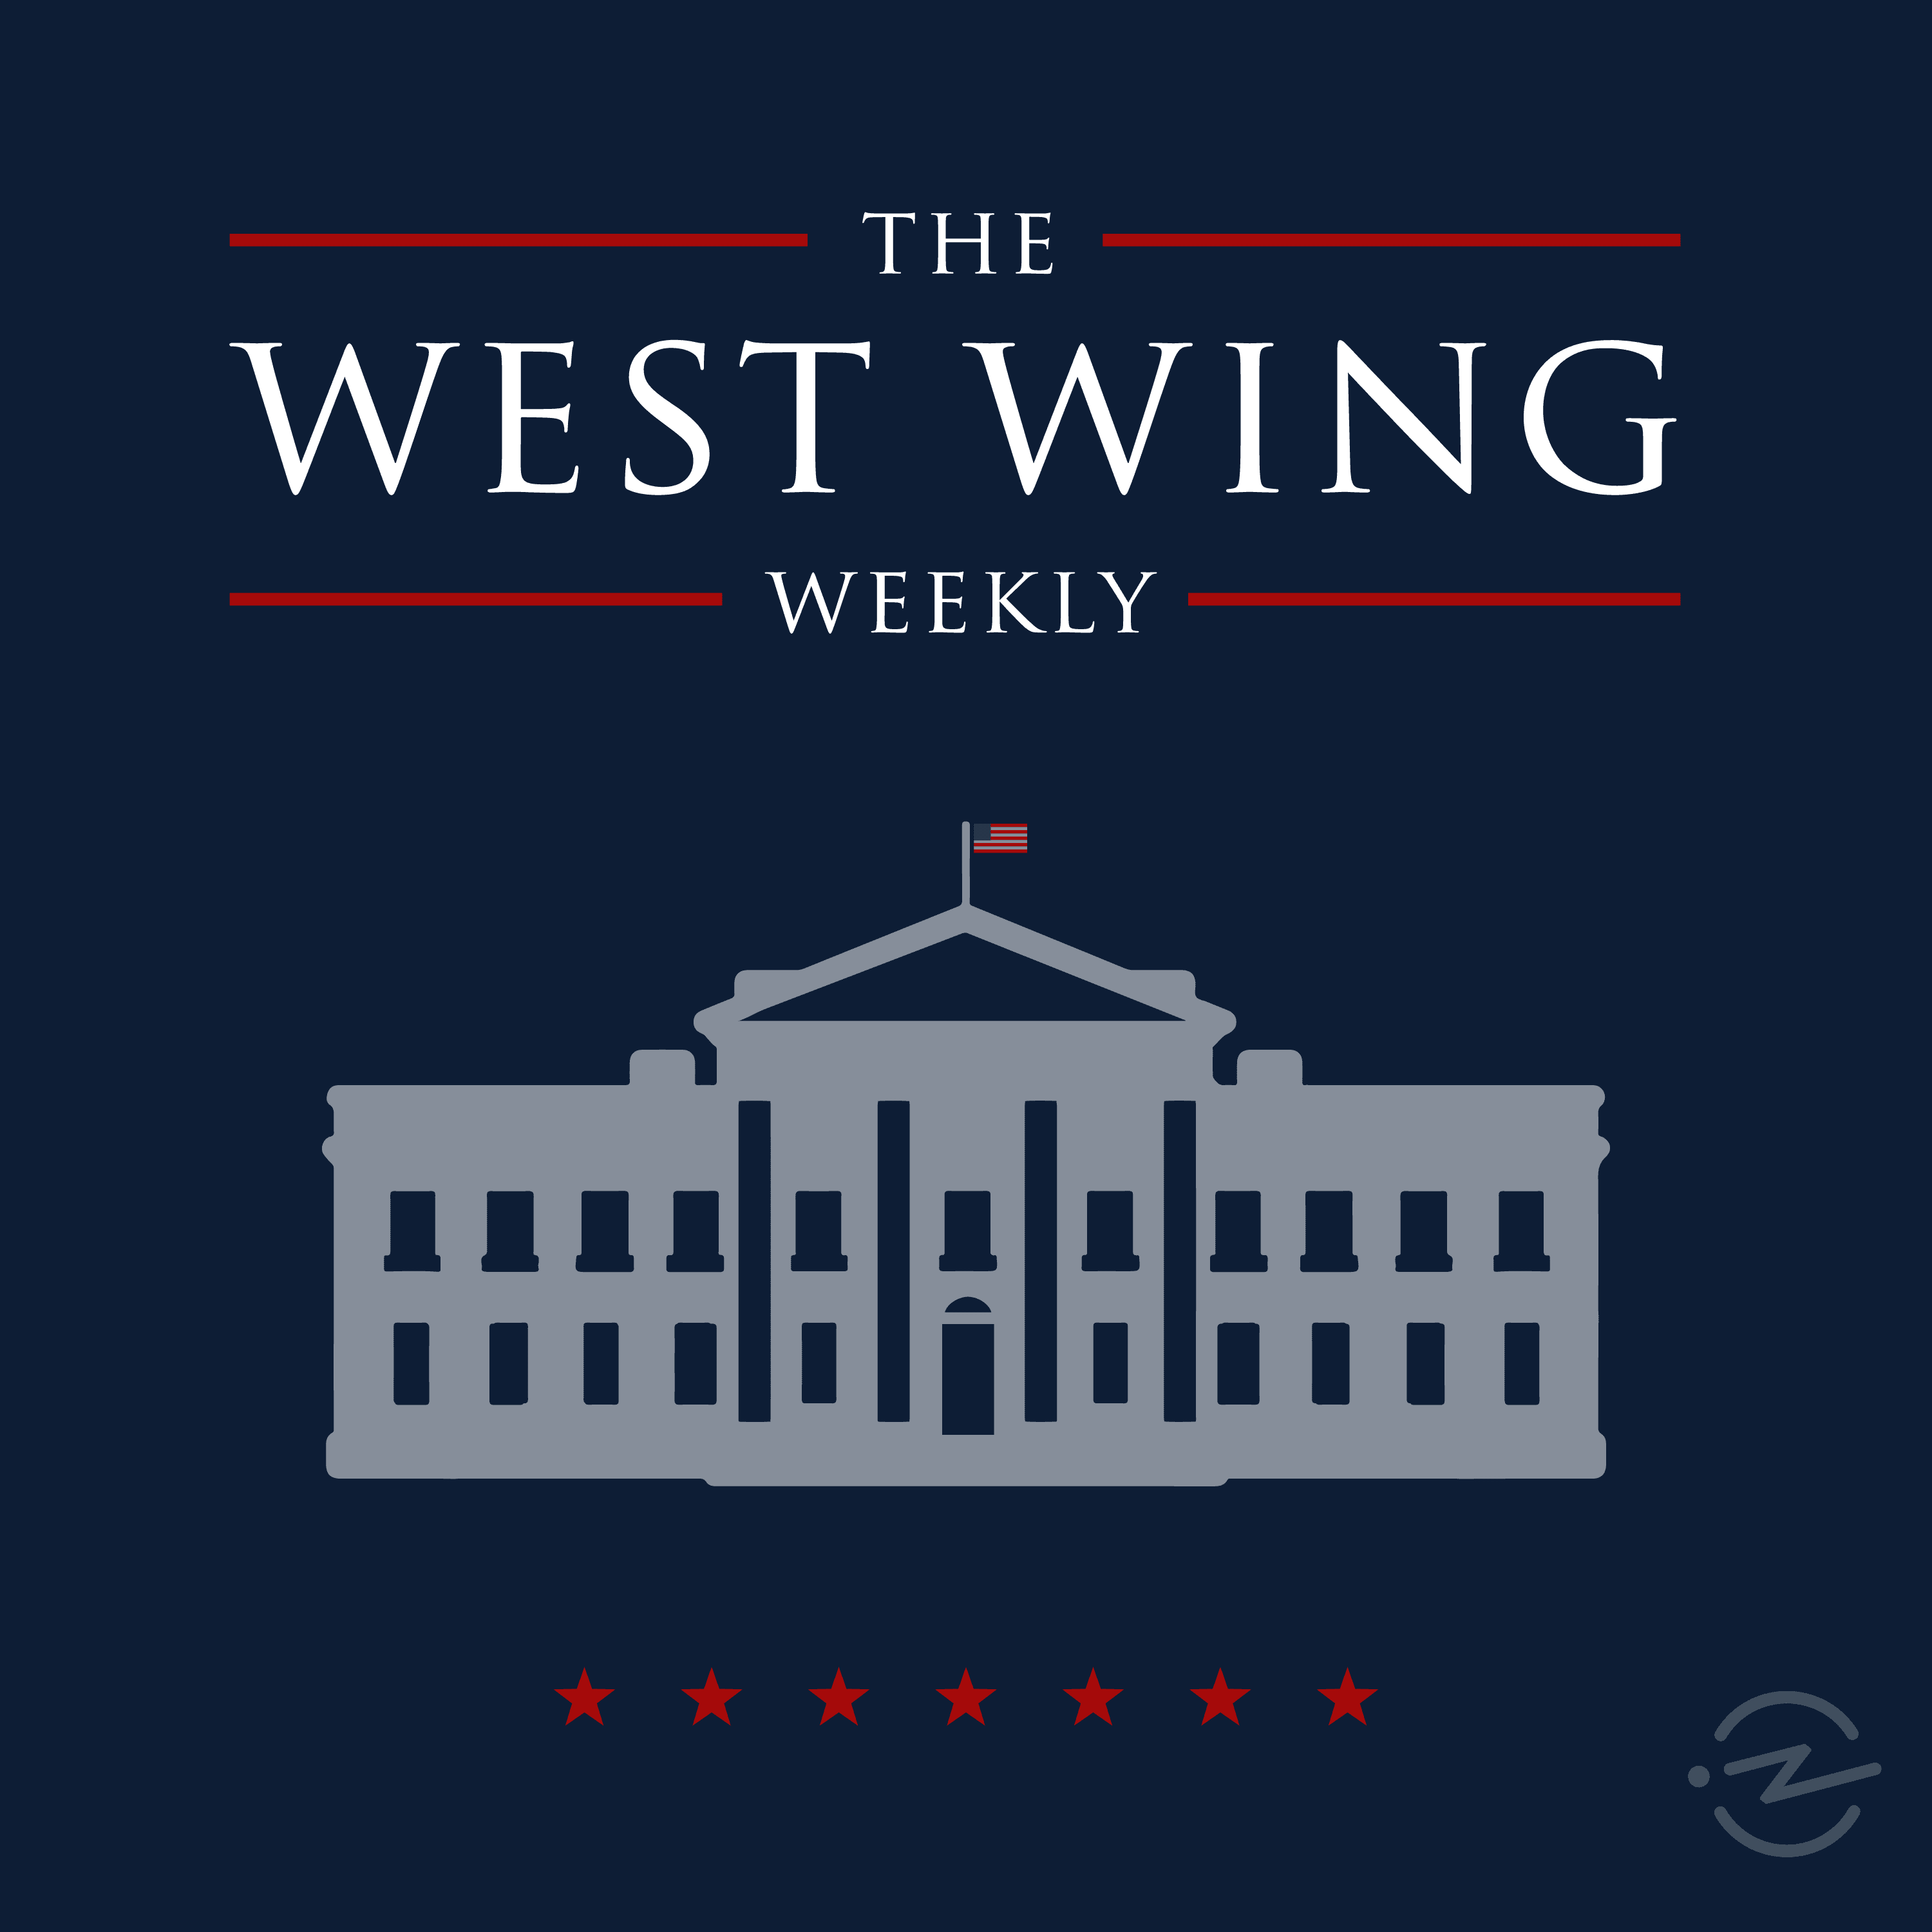 Thumbnail for "0.18: Small Block of Cheese Day (The West Wing Weekly Forever)".